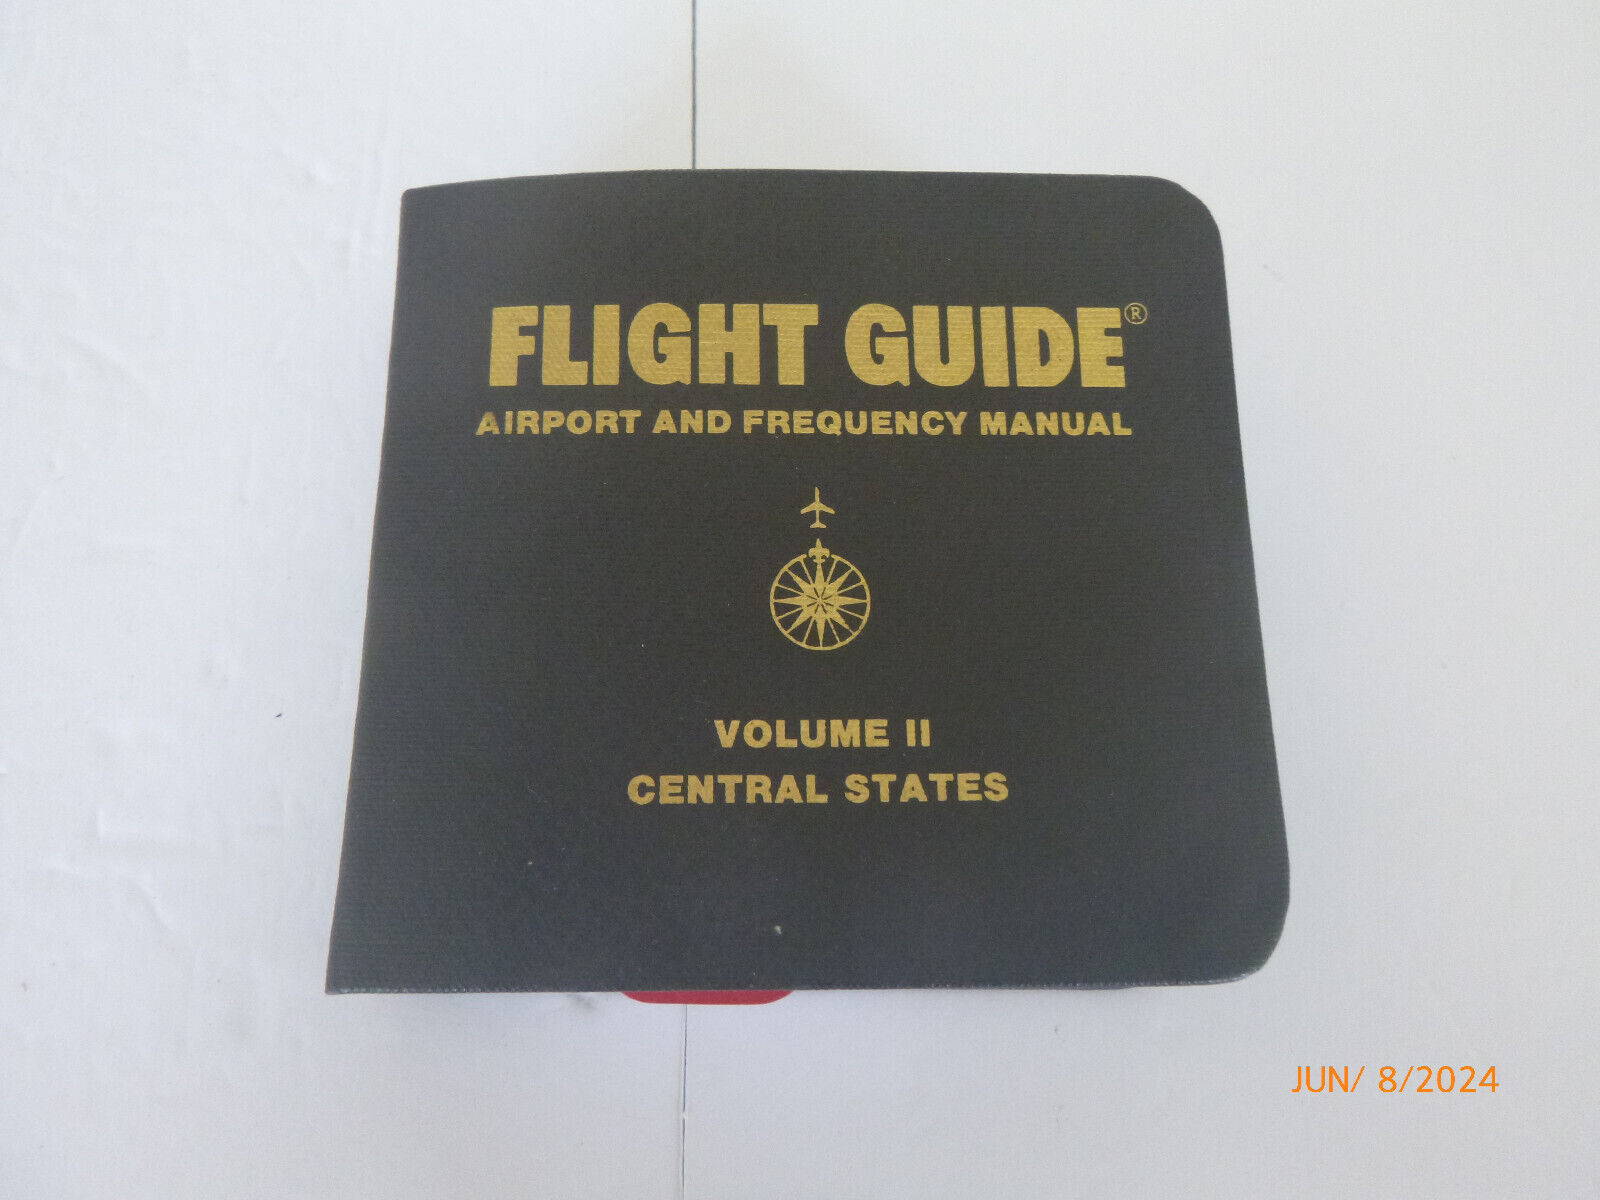 Flight Guide Airport Frequency Manual Vol. II Central States USA - March 1992